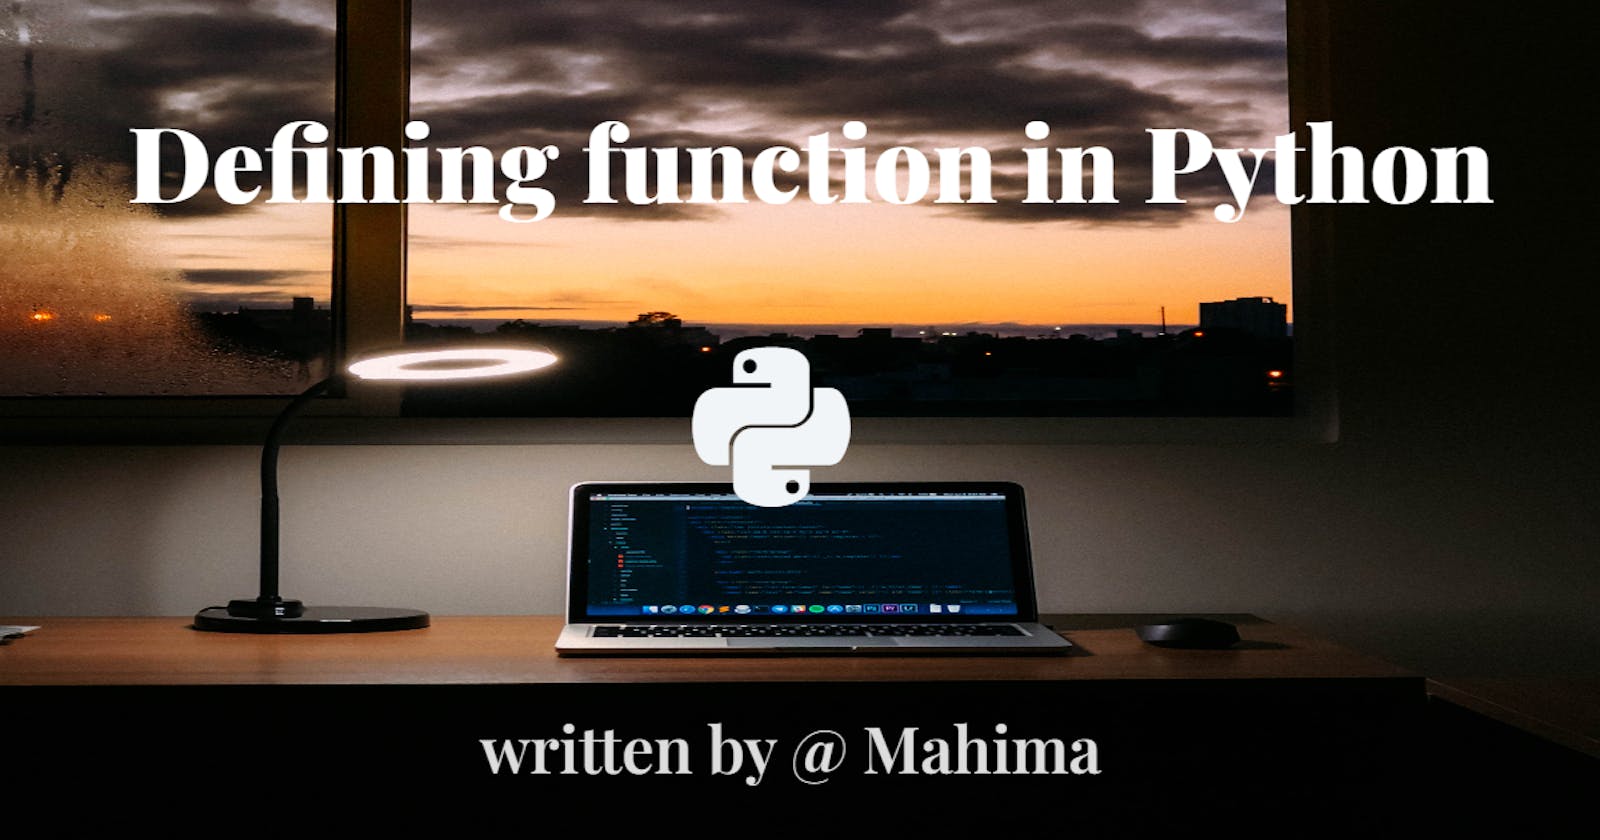 Defining function in Python